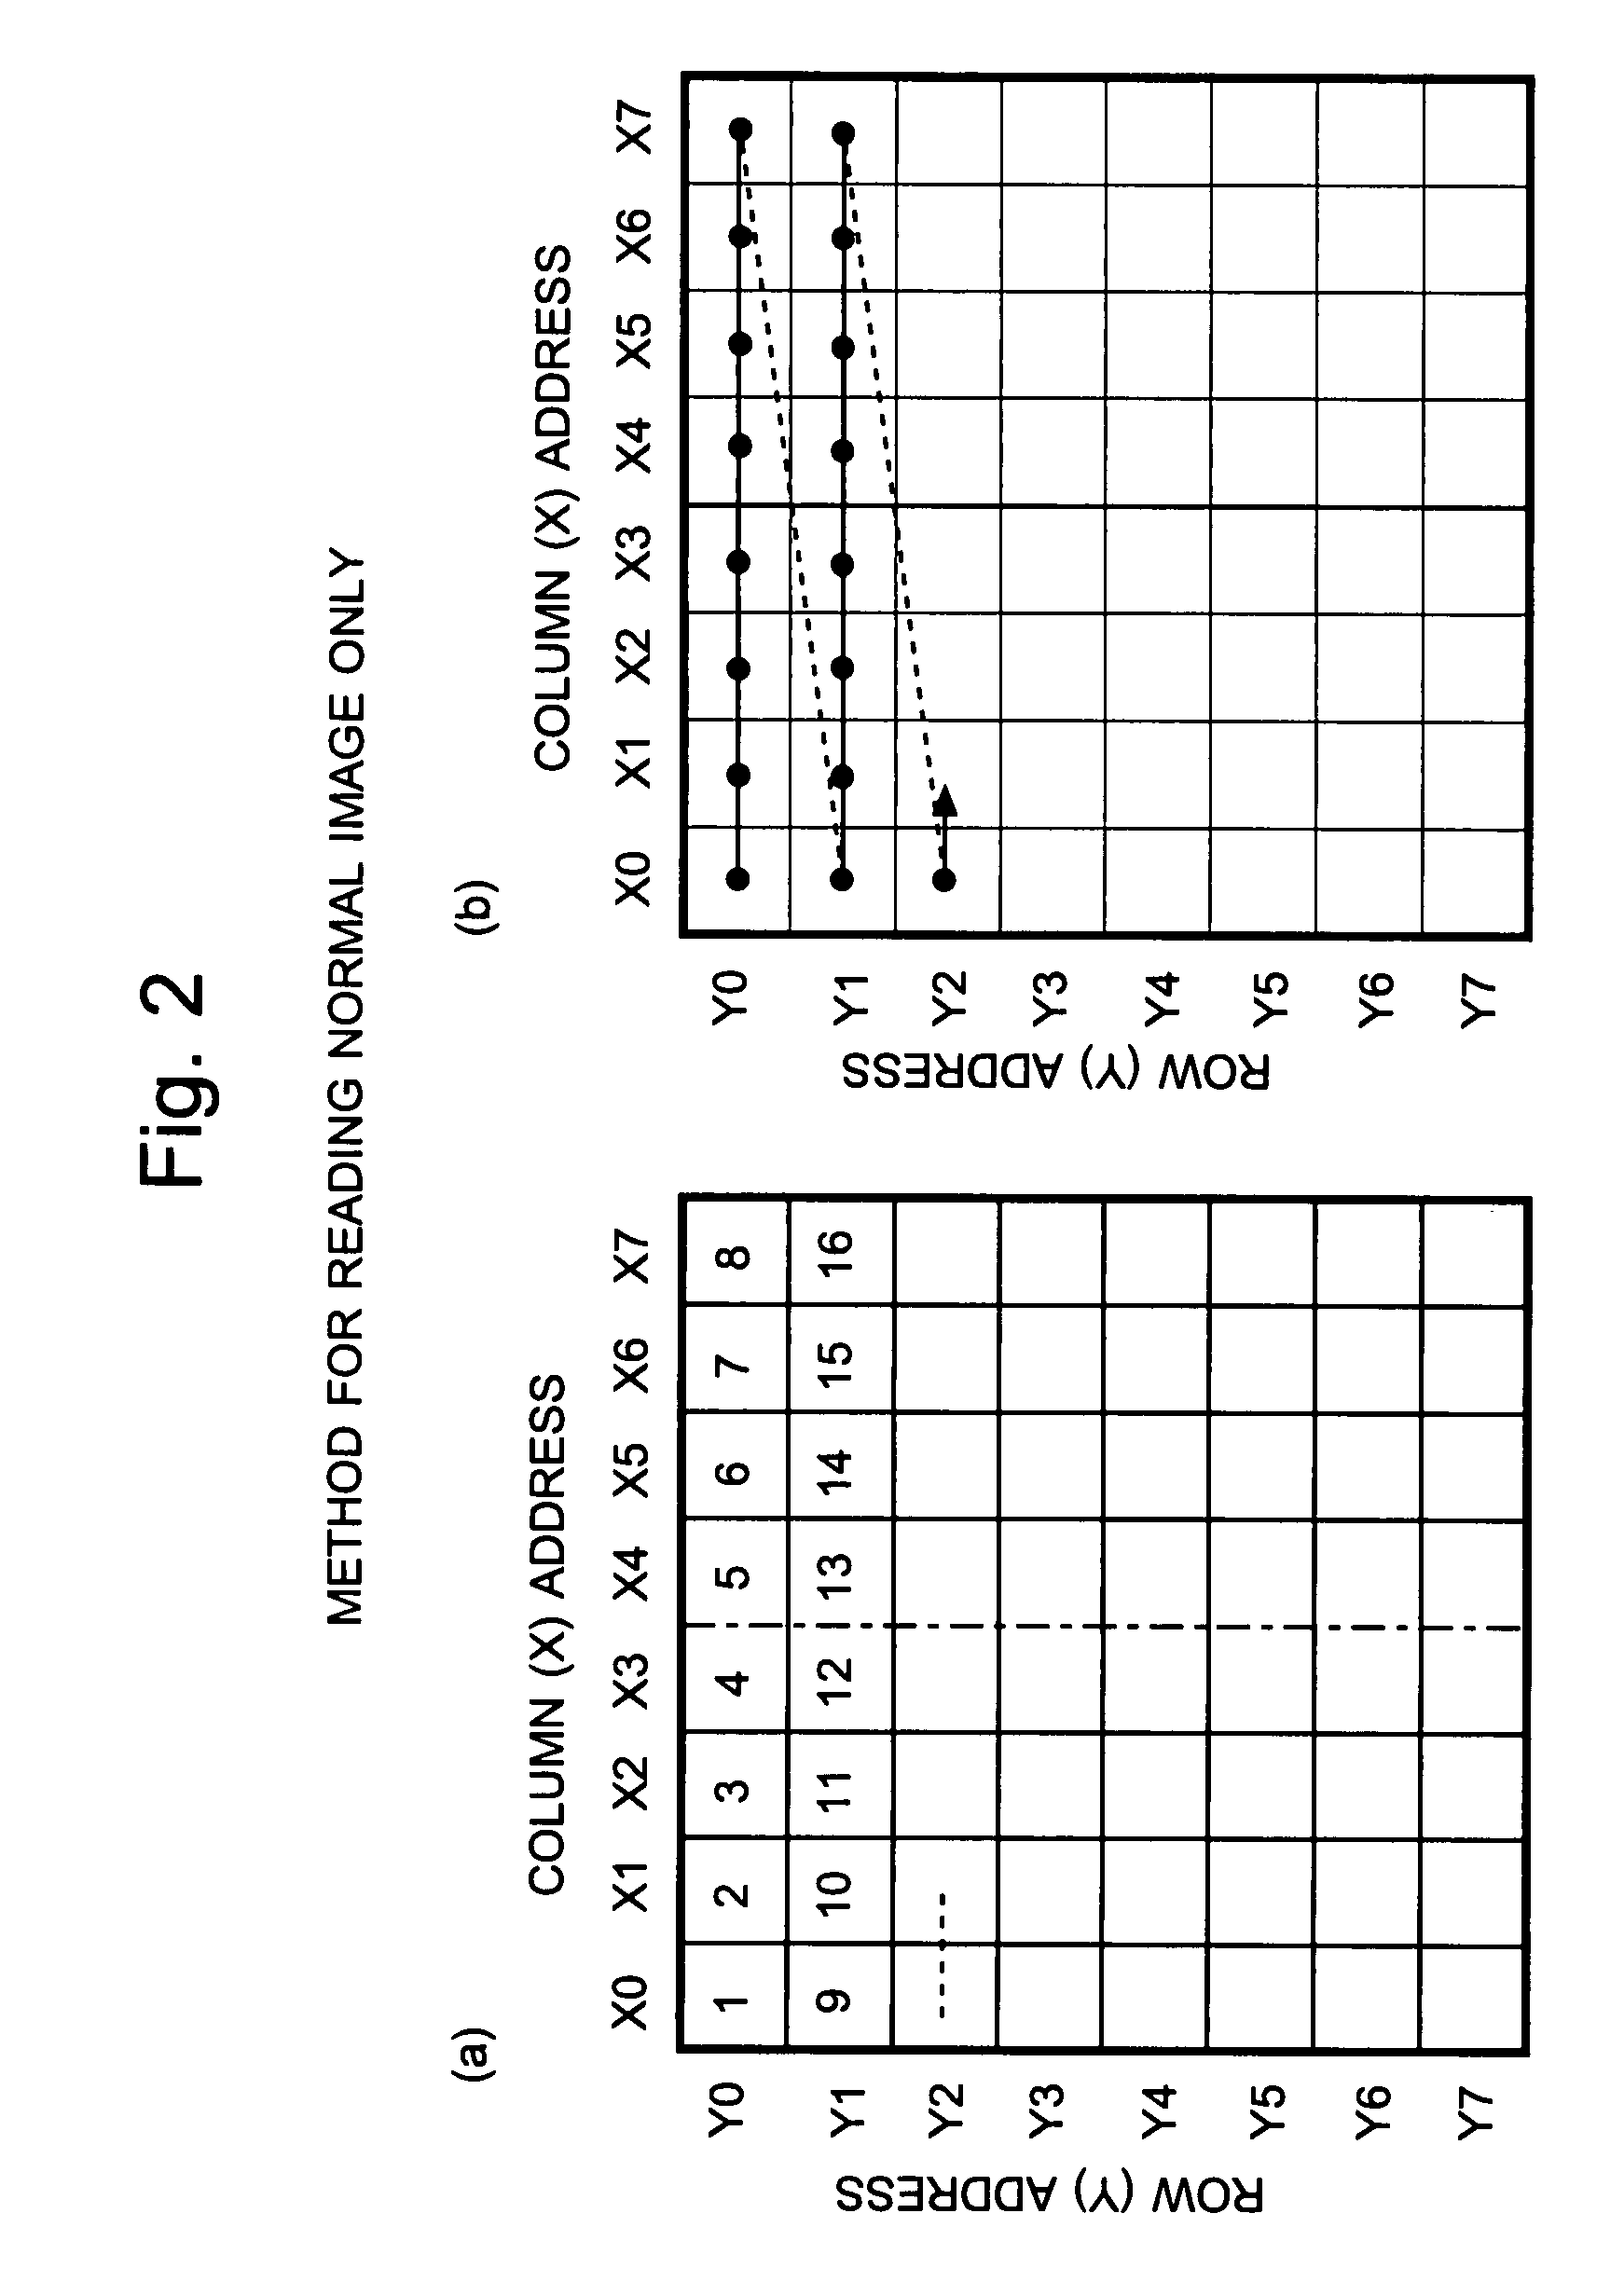 Imaging device and method for reading signals from such device